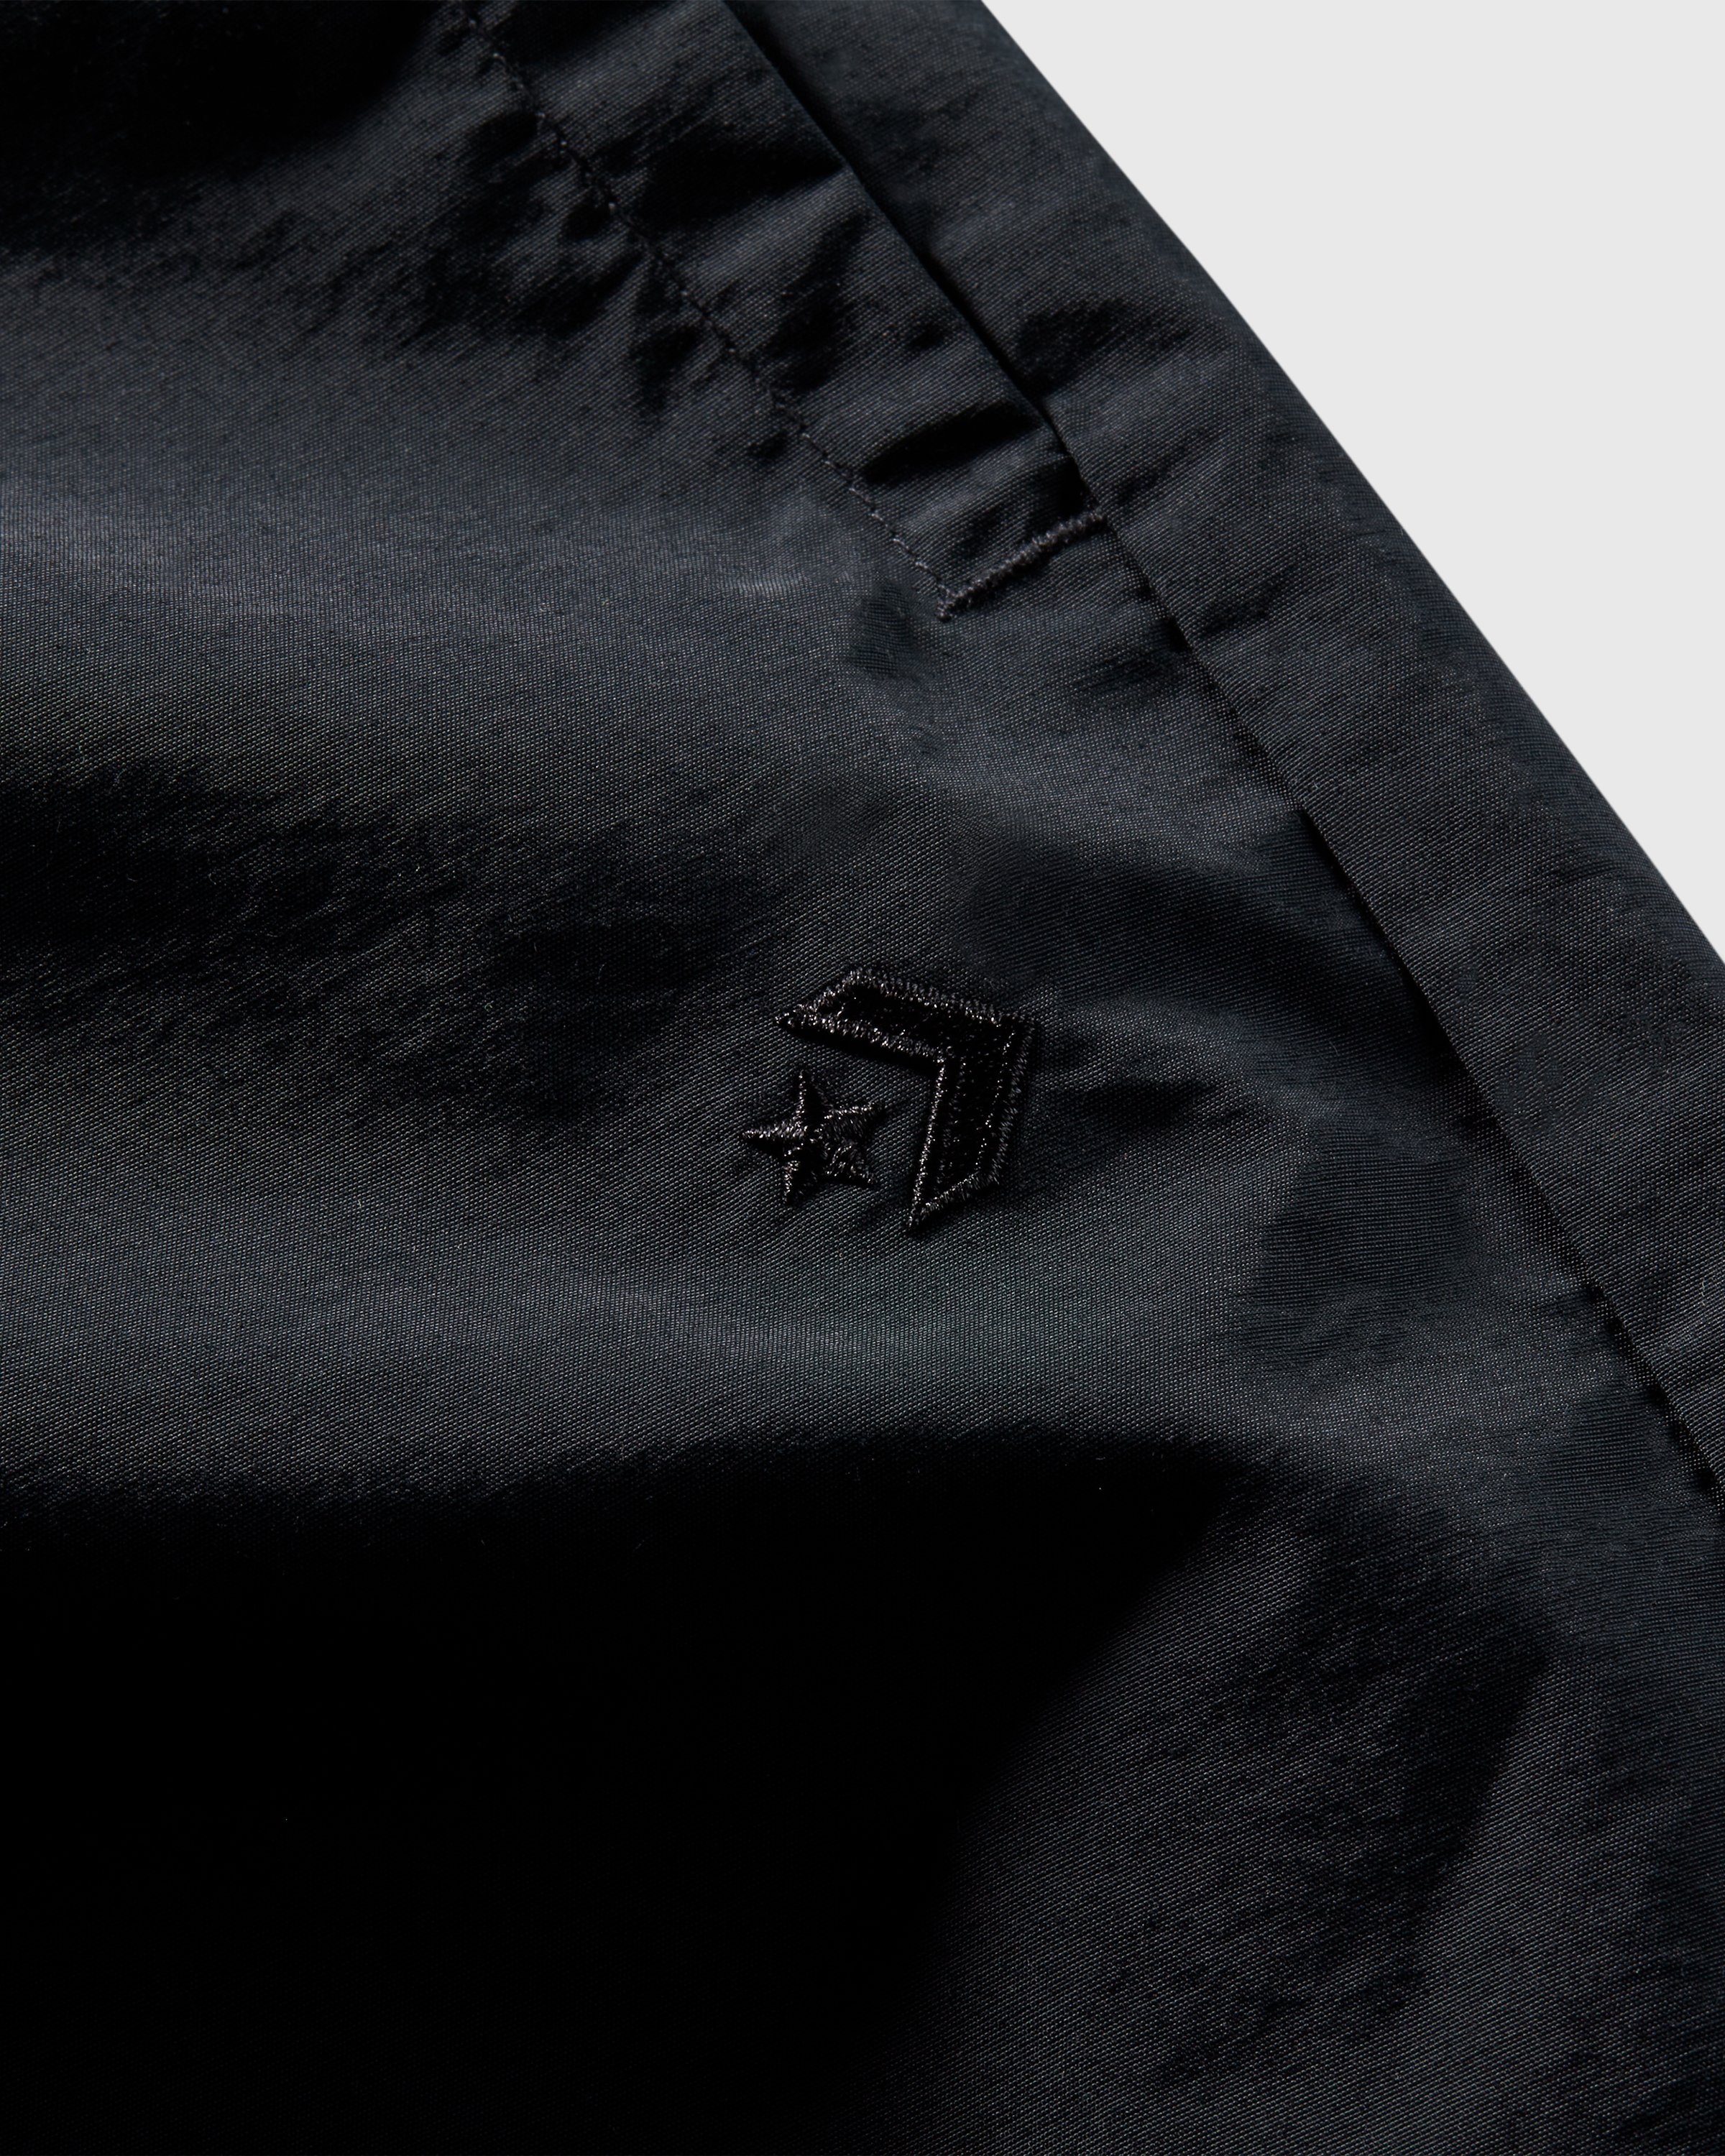 Converse x Barriers - Court Ready Cutter Shorts Black - Clothing - Black - Image 5